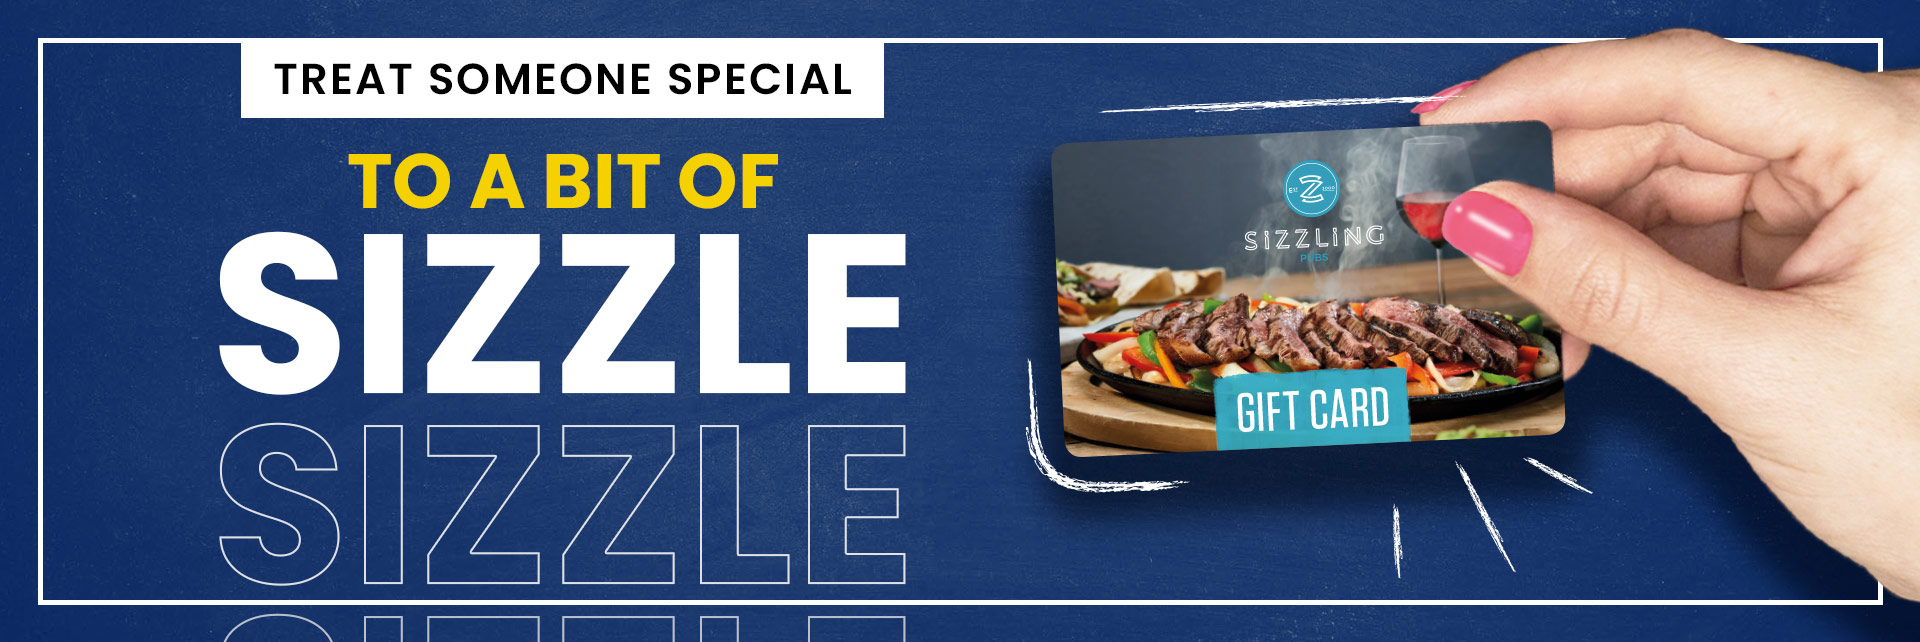 Sizzling Pubs Gift Card at The Plough, Aylesbury in Aylesbury